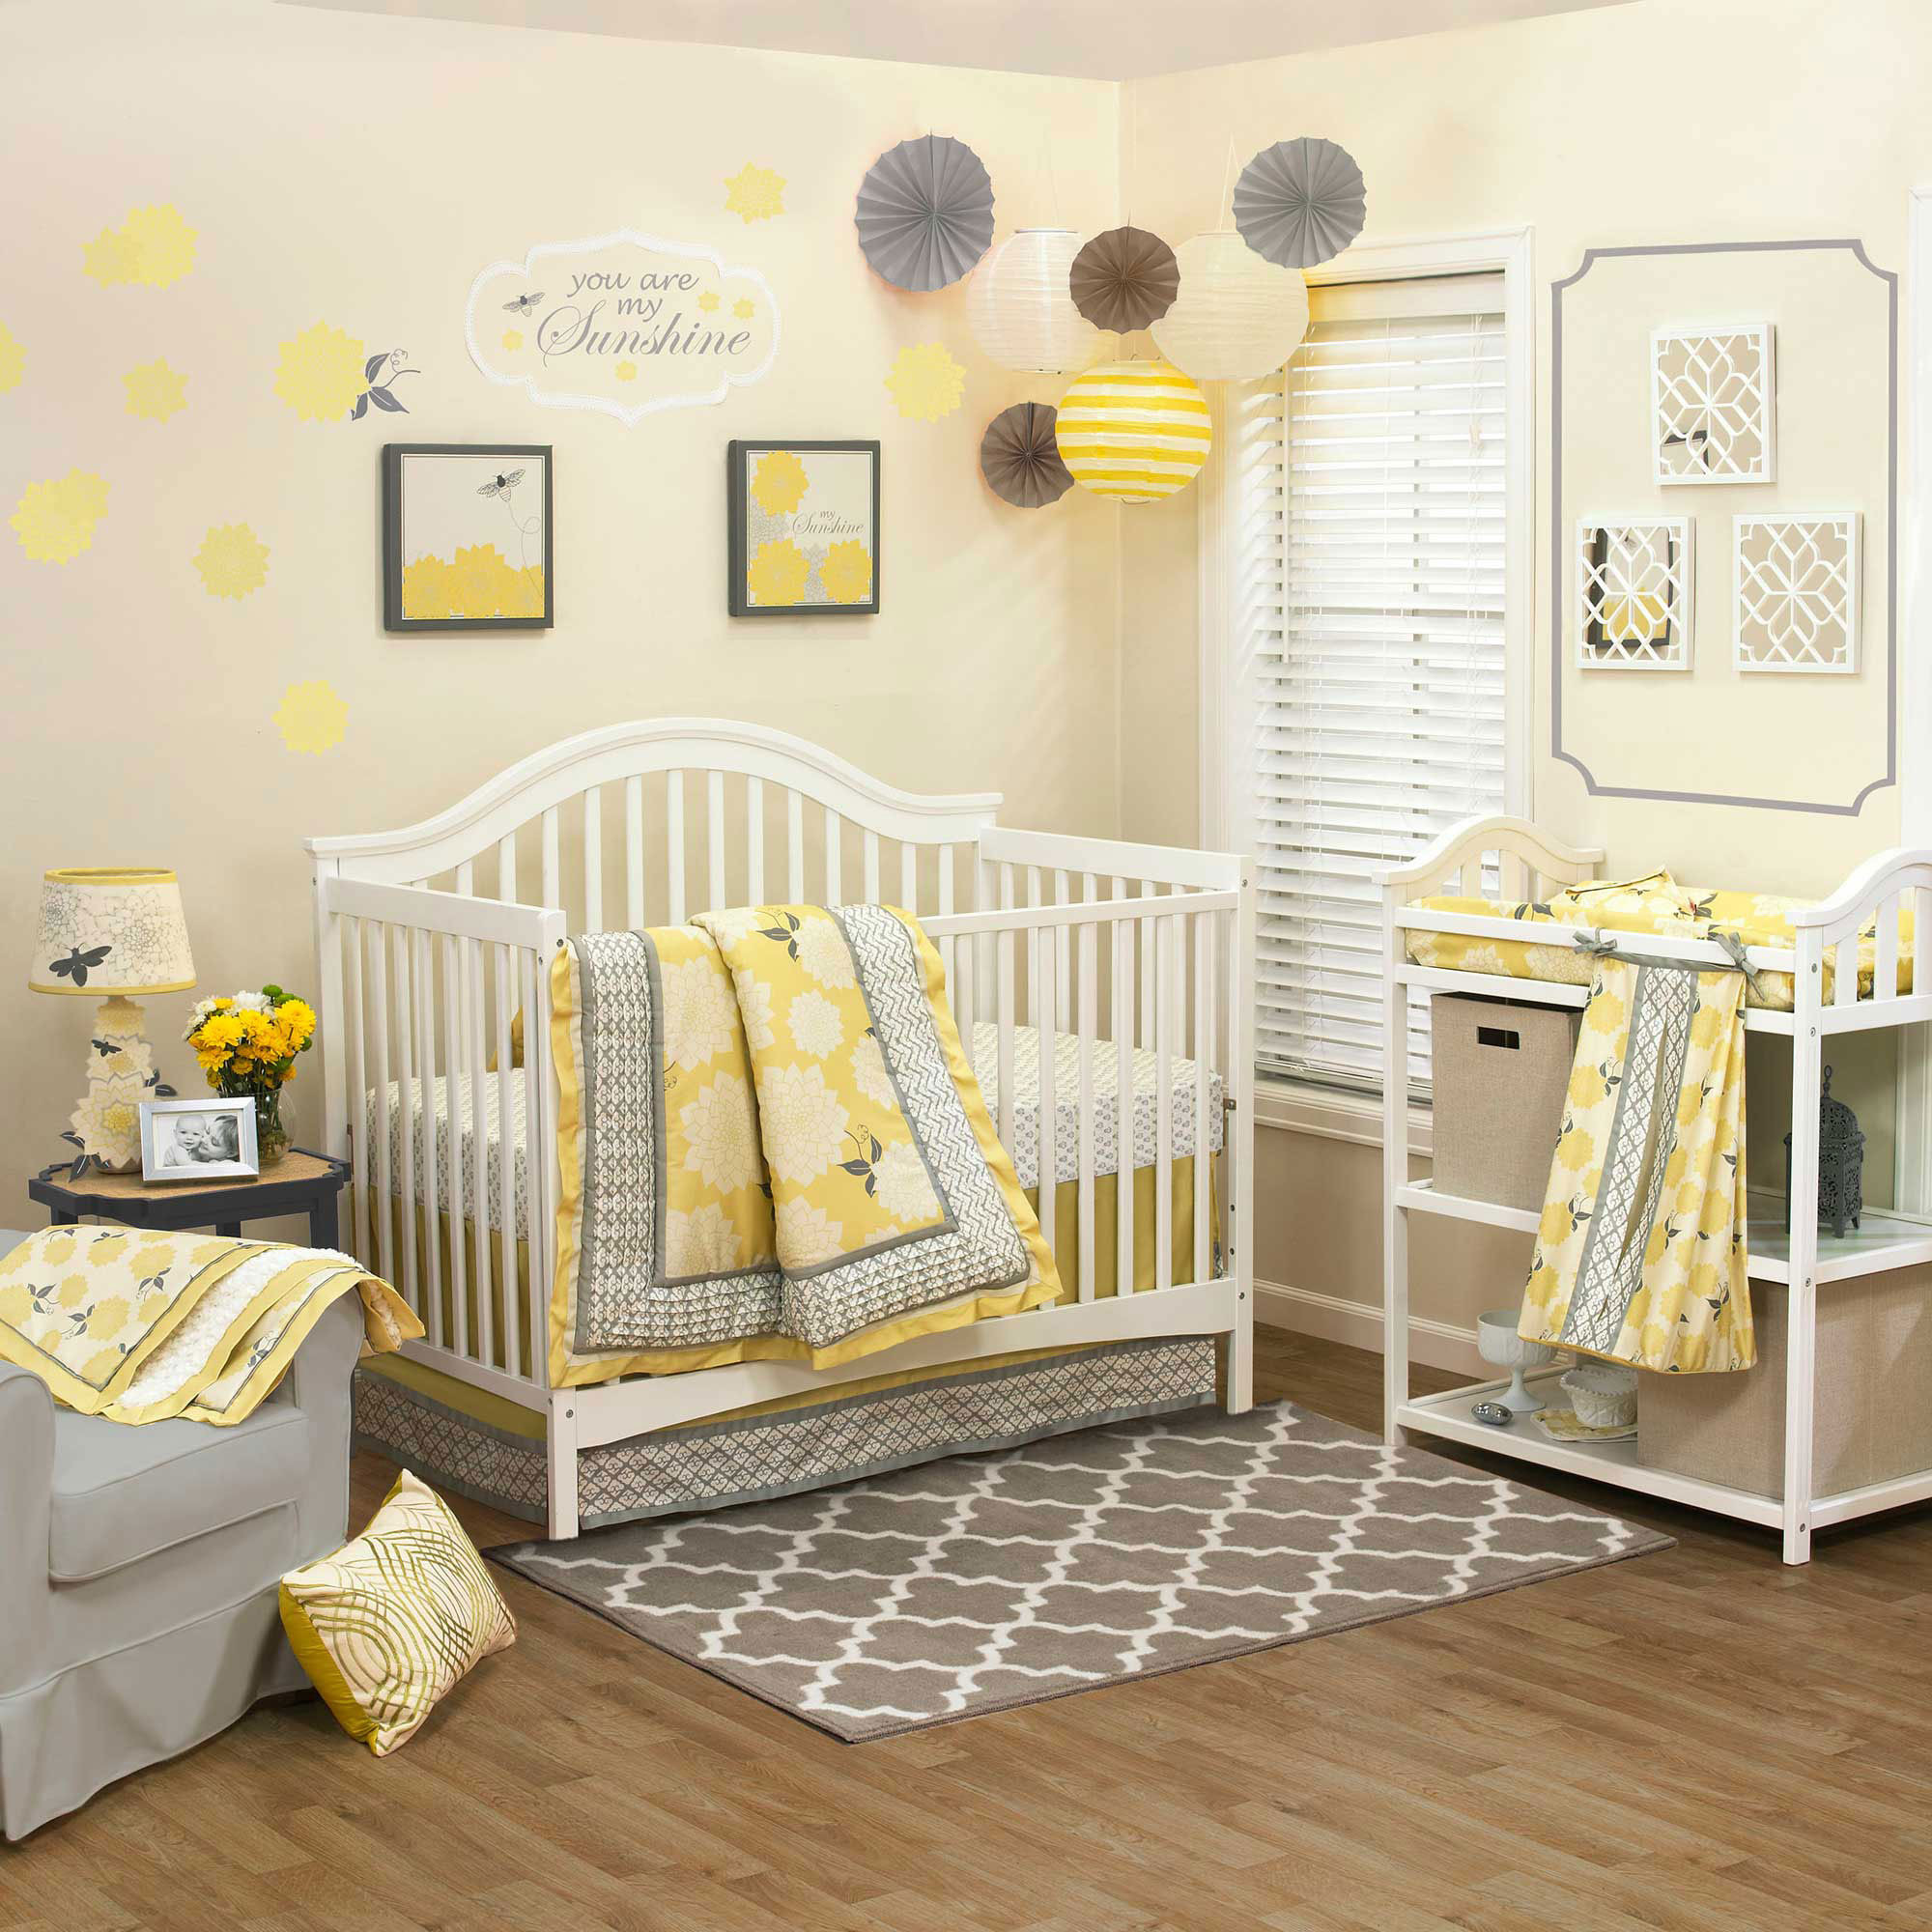 Baby Room Decoration Items
 Baby Girl Nursery Ideas 10 Pretty Examples Decorating Room